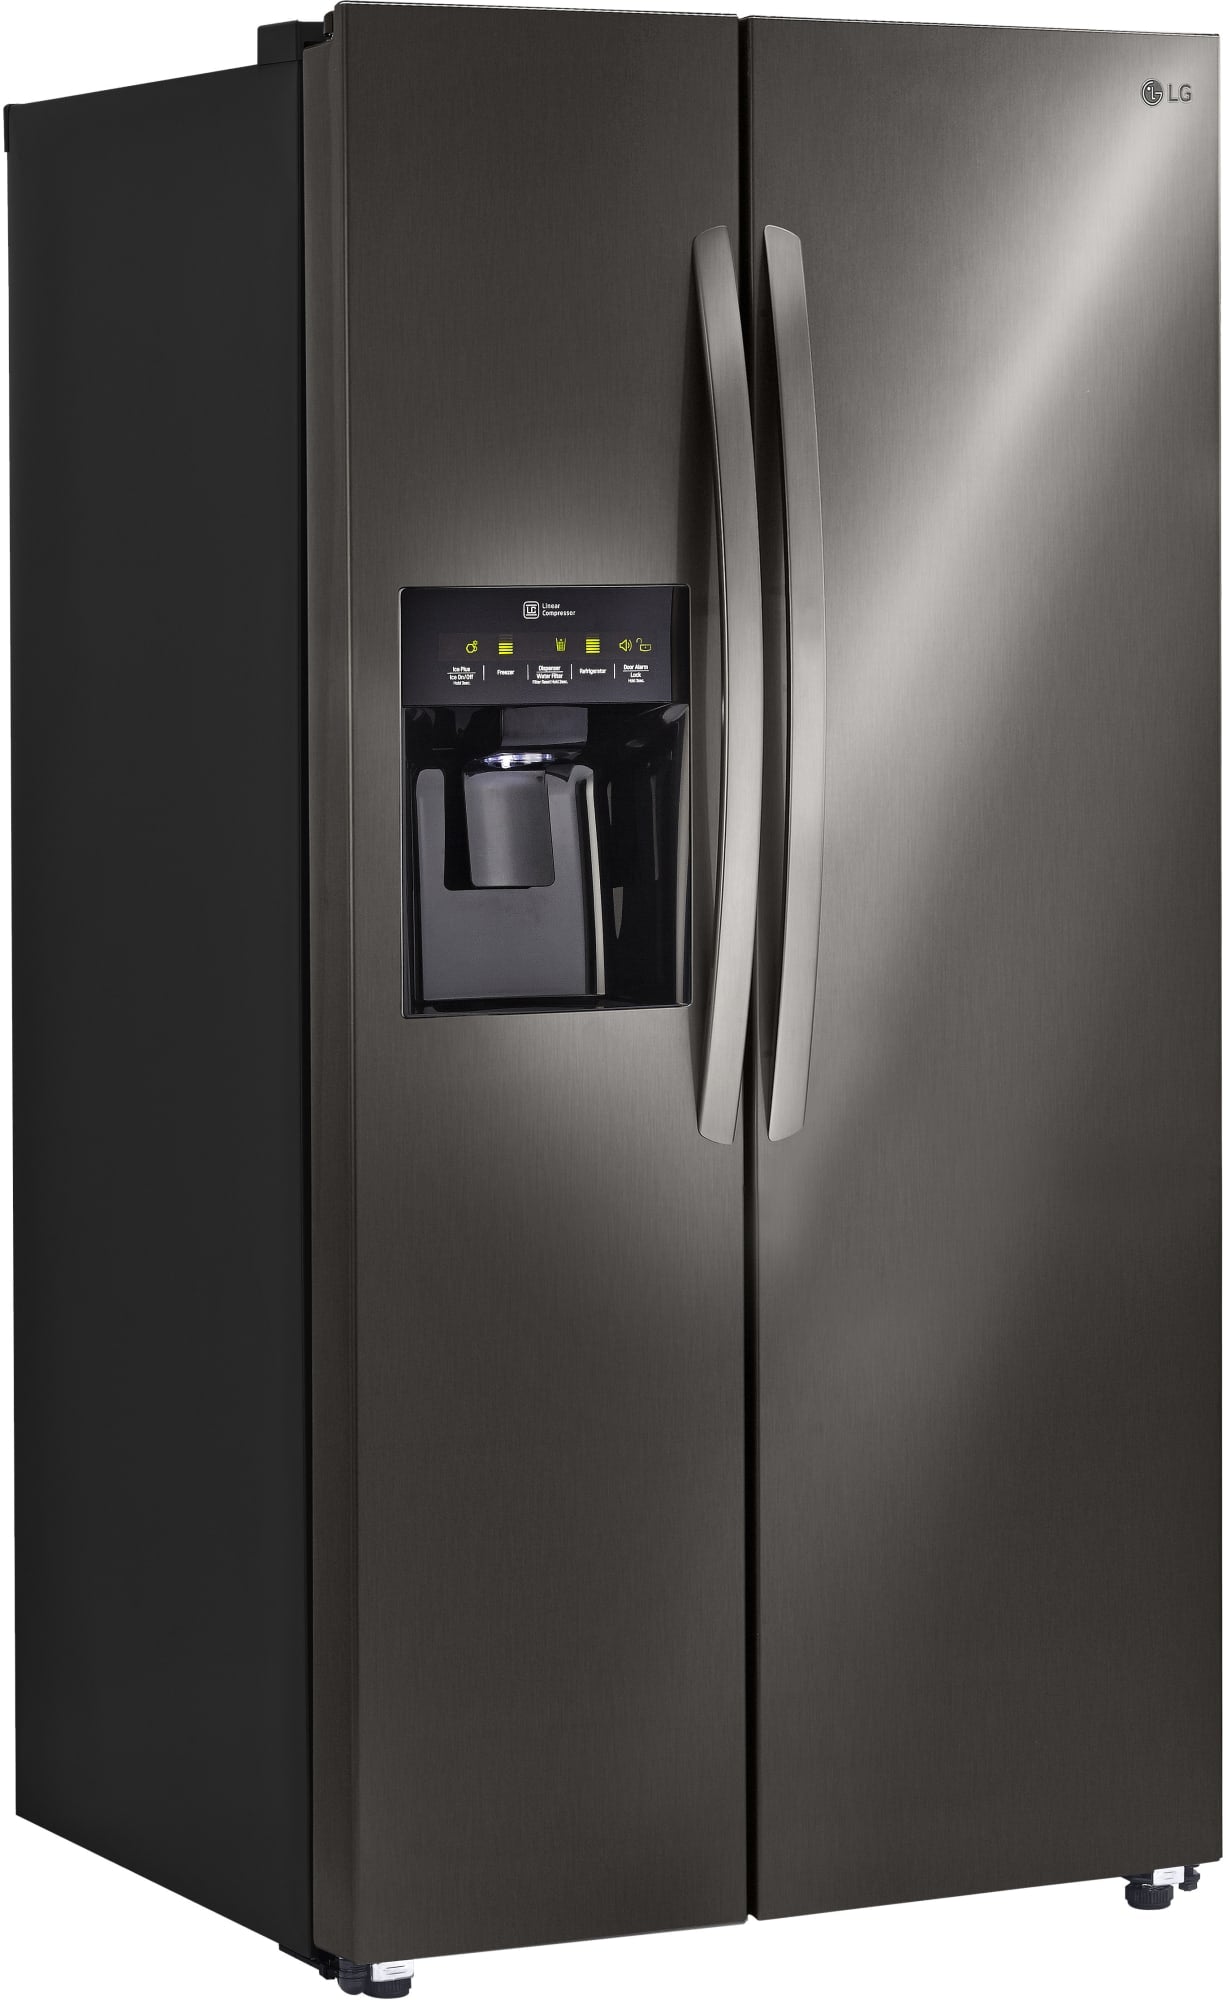 LG LSXS26336D 36 Inch Side-By-Side Refrigerator with Linear Compressor, Ice and Water Dispenser